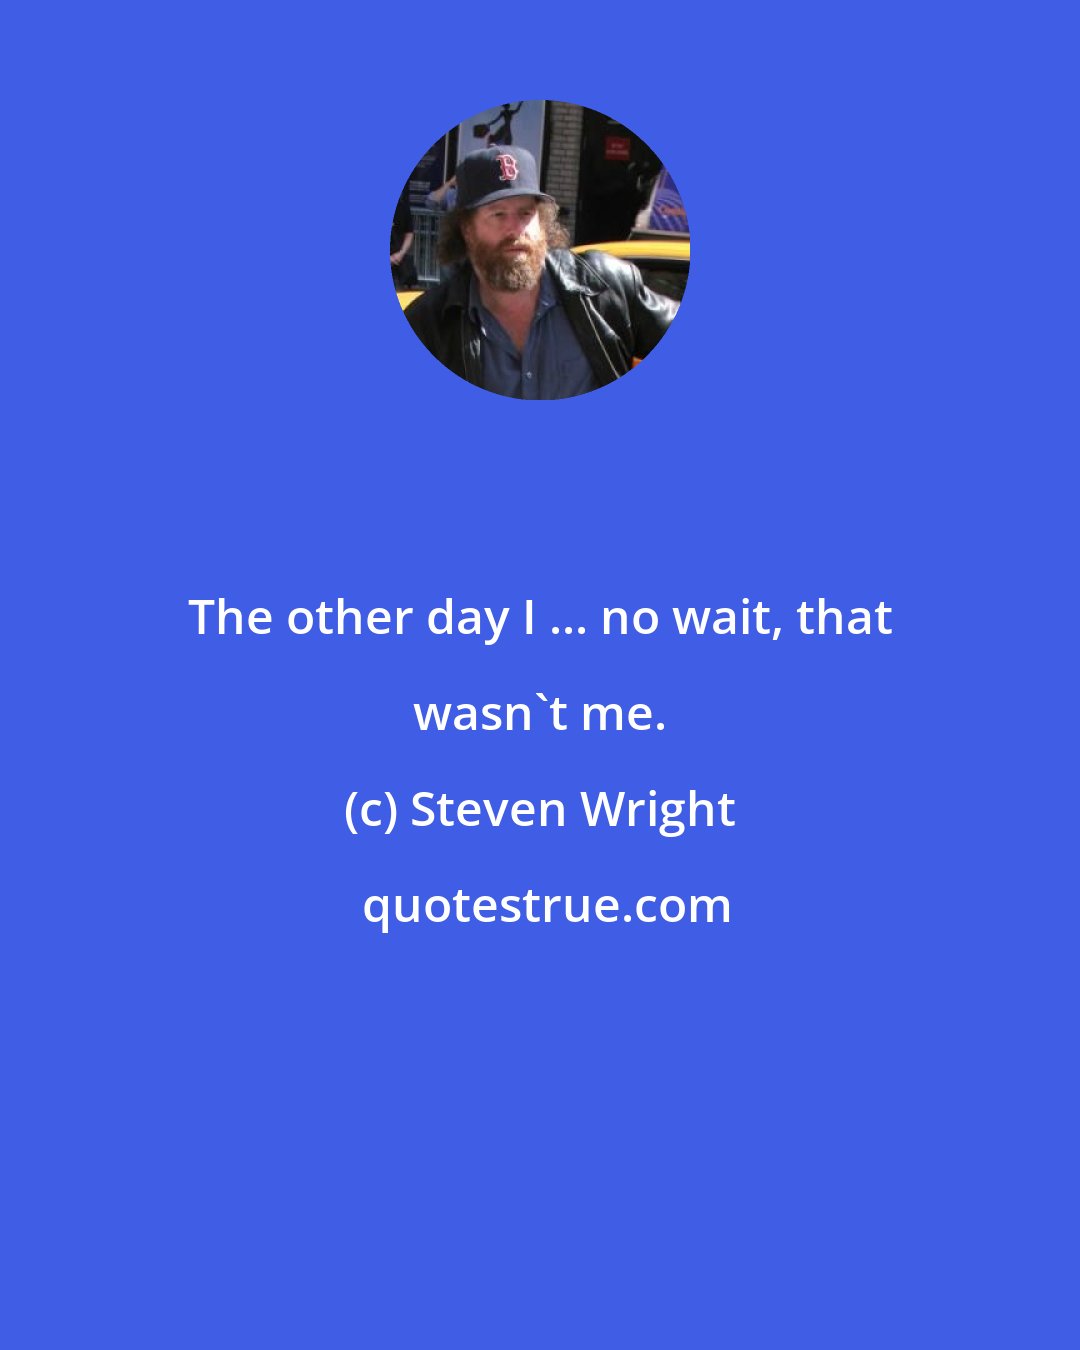 Steven Wright: The other day I ... no wait, that wasn't me.